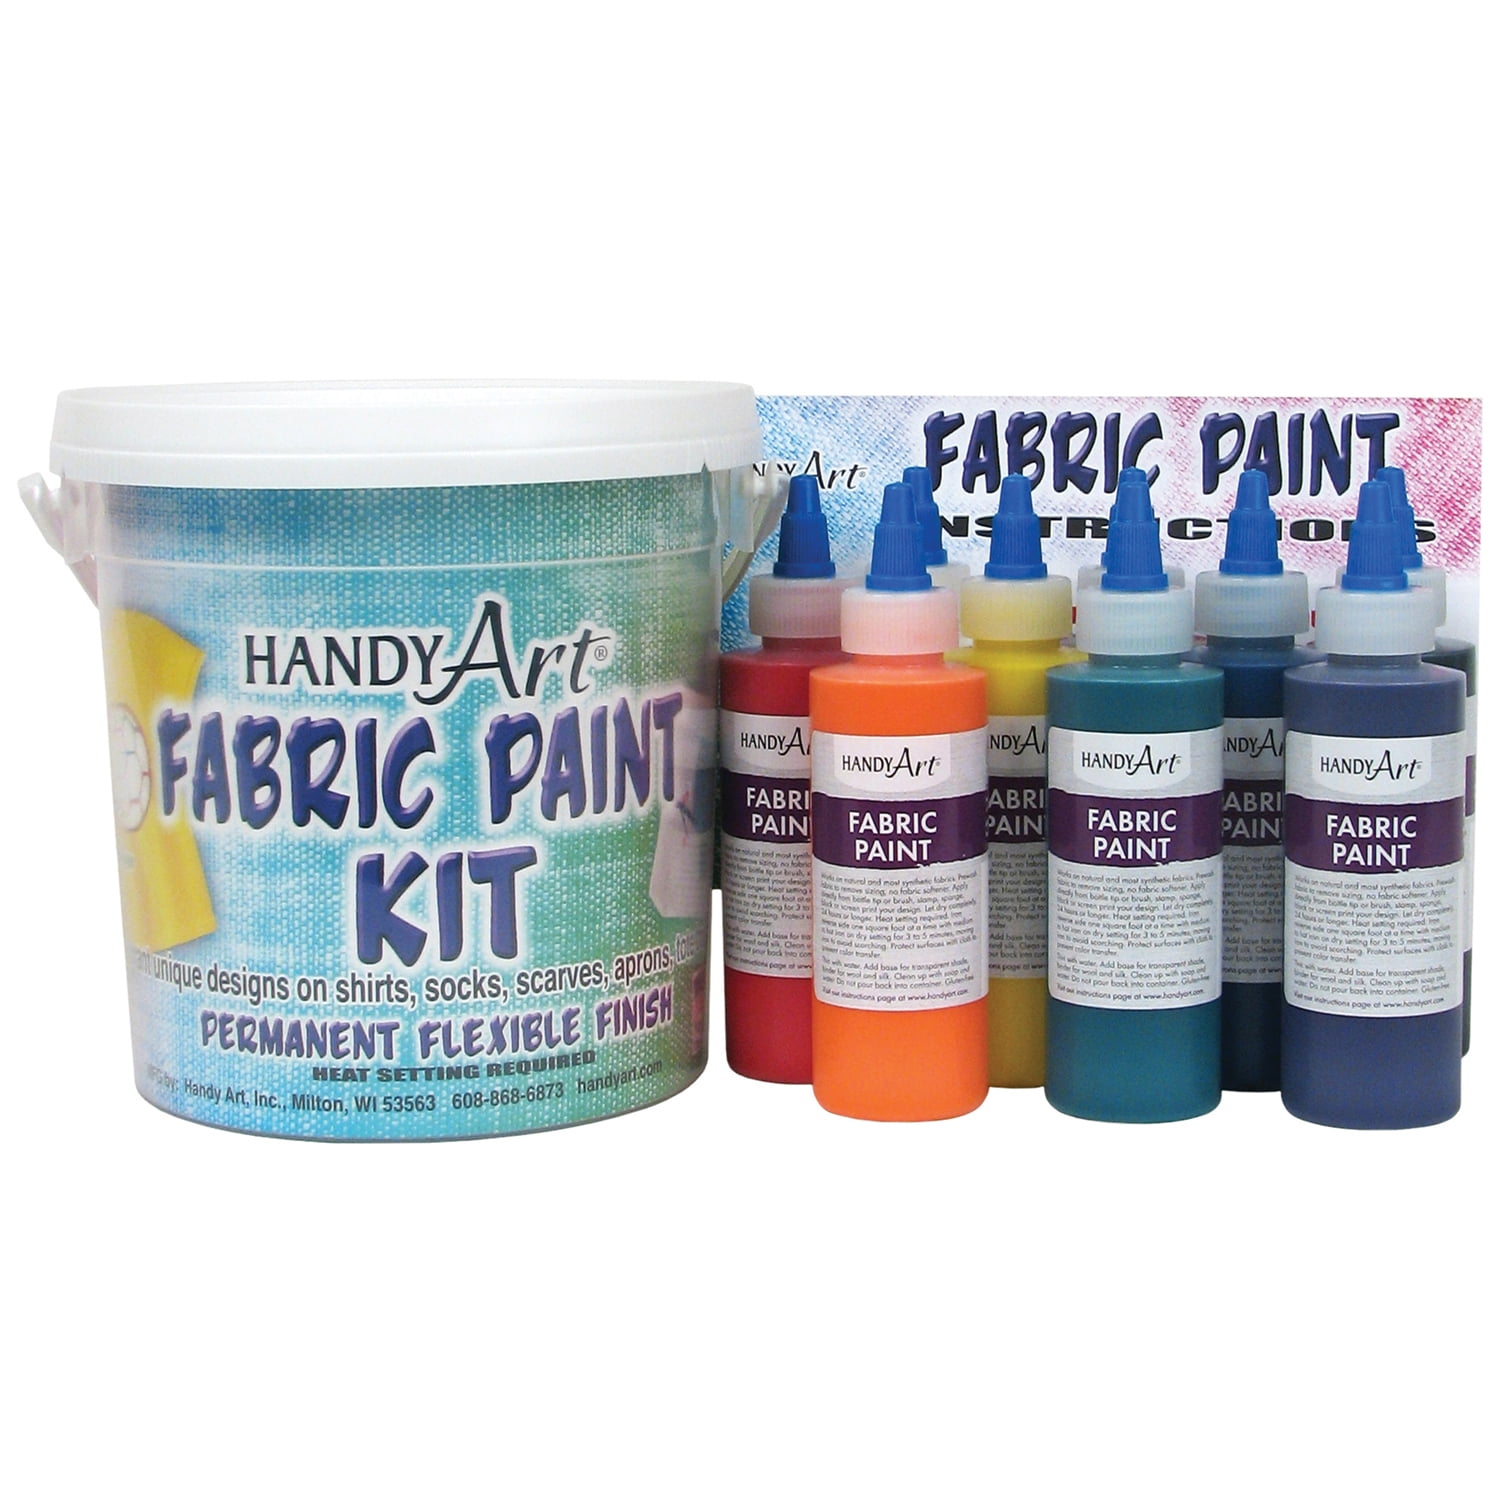 Metallic Fabric Paint, Shuttle Art 18 Metallic Colors Permanent Soft Fabric  Paint in Bottles (60ml/2oz) with Brush and Stencils, Non-Toxic Textile